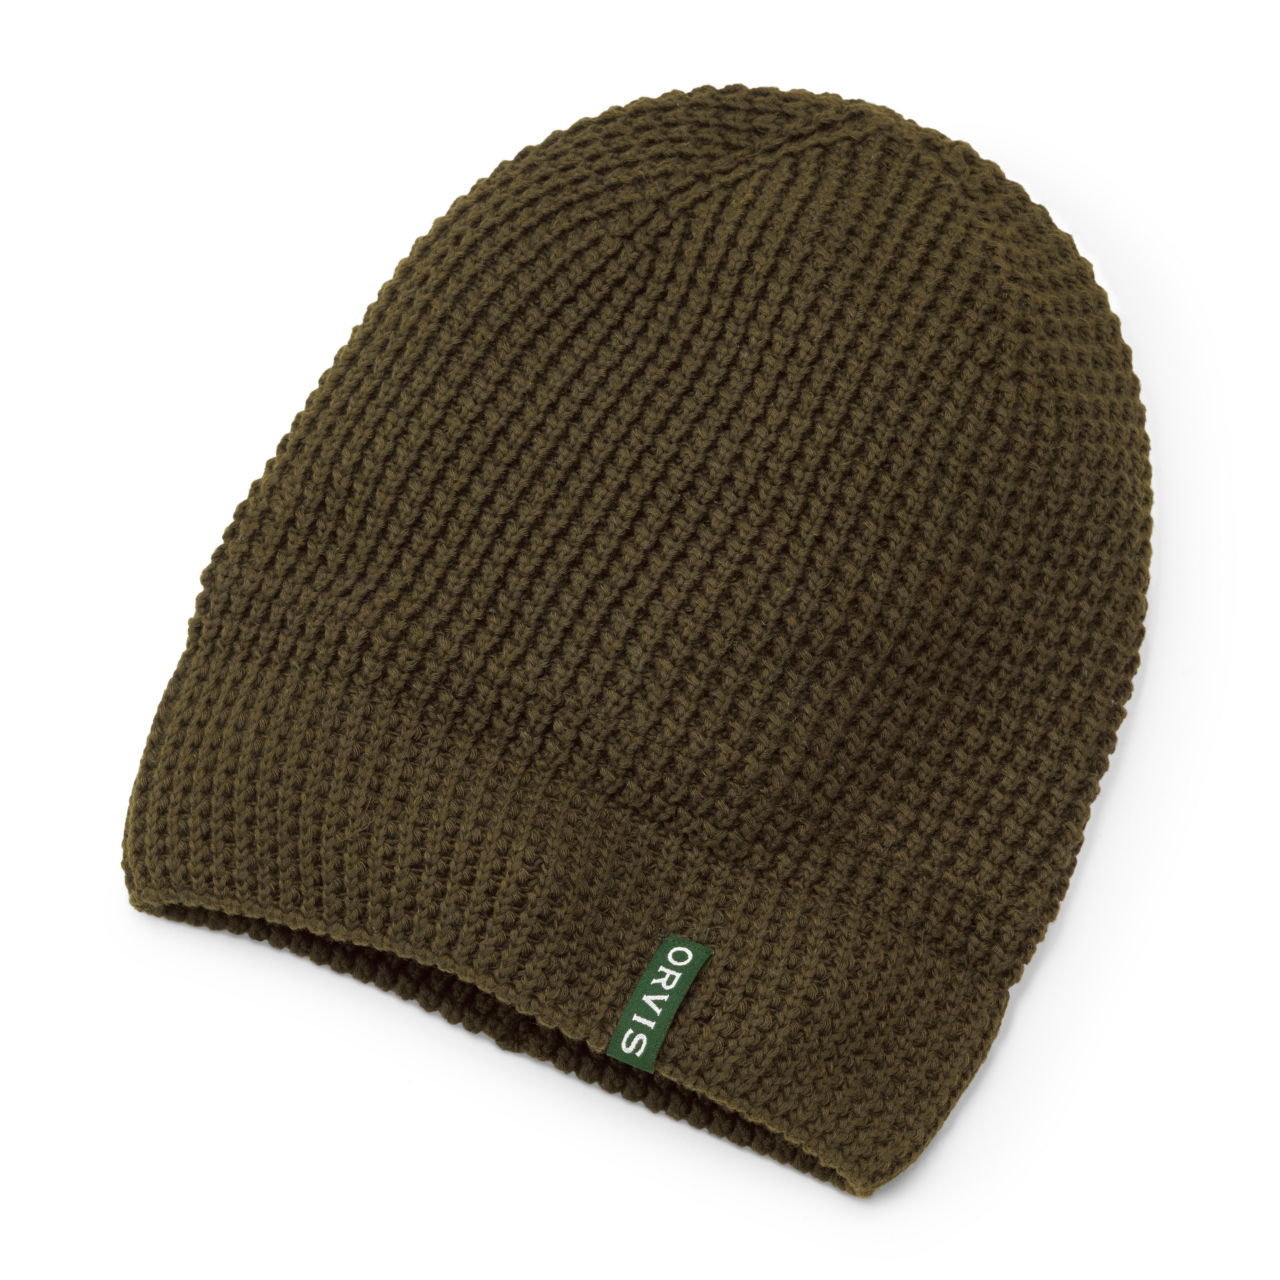 Chunky Knit Beanie - EVERGREEN image number 0